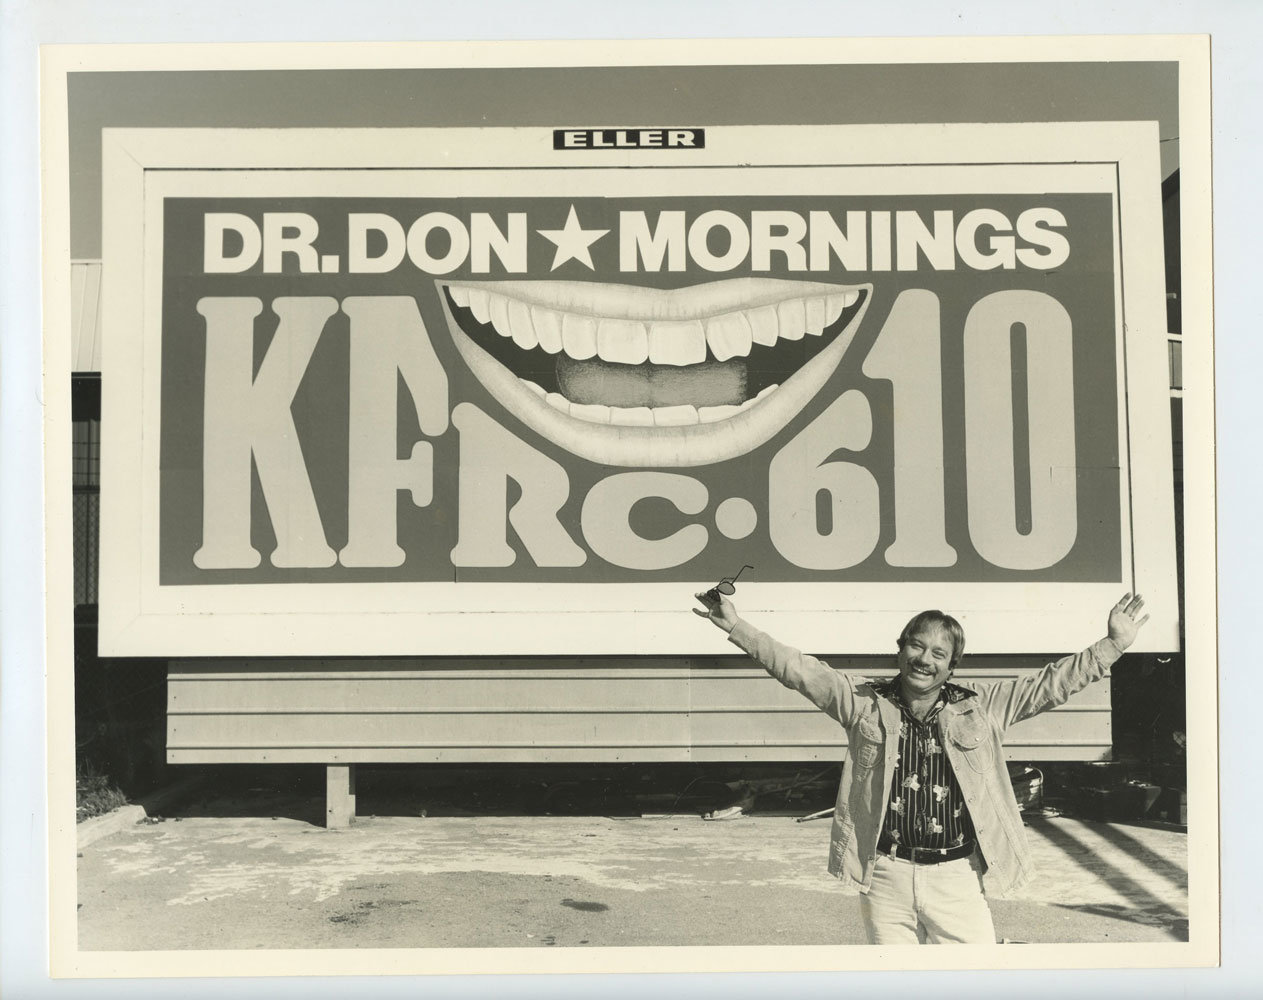 Dr. Don Photo 1970s KFRC Radio Personality Publicity Promo